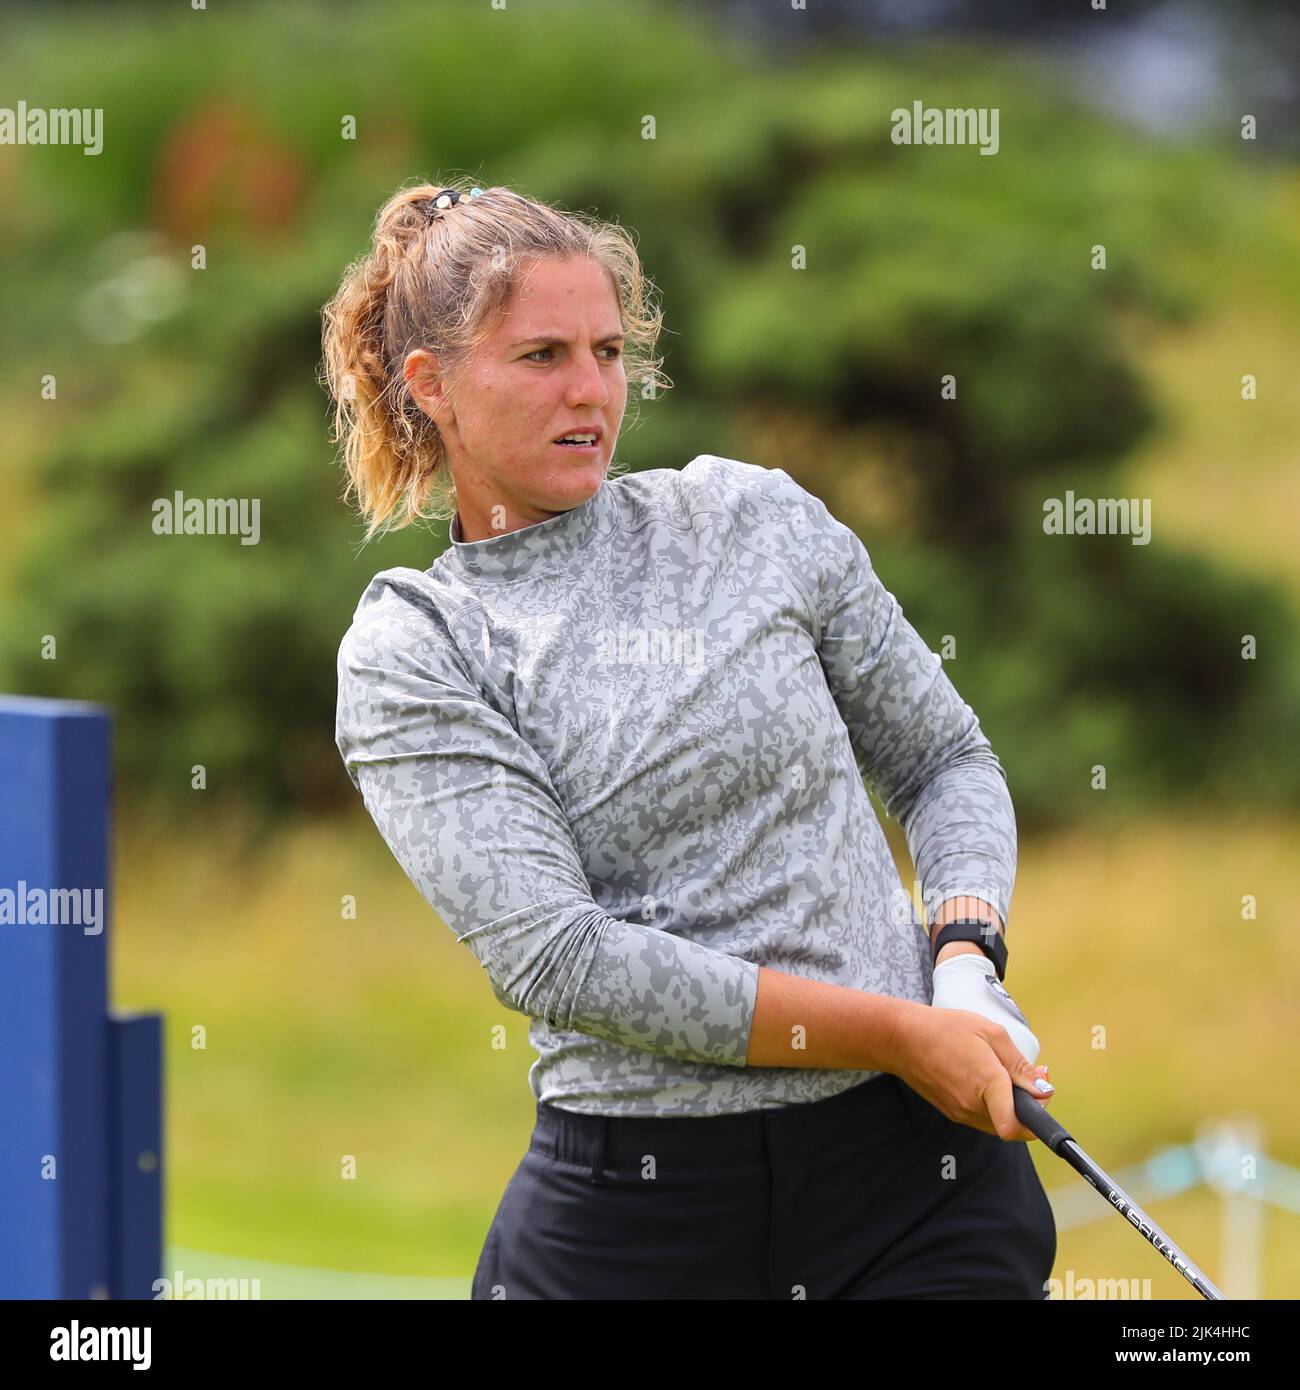 Irvine, UK. 30th July, 2022. The third round of the Trust Golf Women's Scottish Golf took place with 75 players making the cut. Heavy overnight rain from Friday into Saturday made for a softer and more testing course. Leonie Harm teeing off at the 9th. Credit: Findlay/Alamy Live News Stock Photo